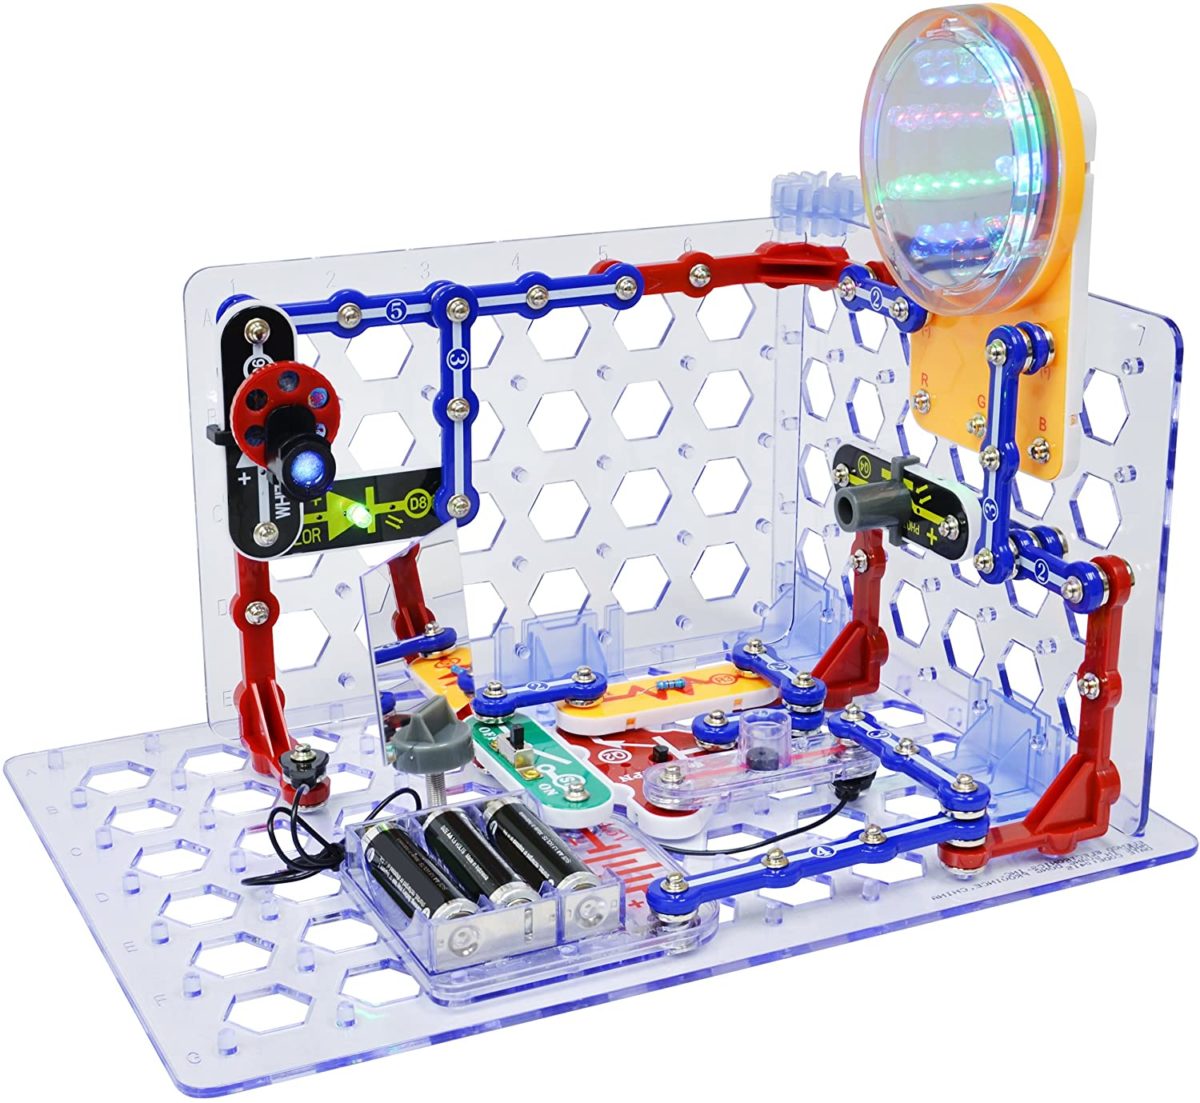 Snap Circuits 3D Illumination Electronics Exploration Kit - Top Toys and Gifts for Ten Year Old Boys 2